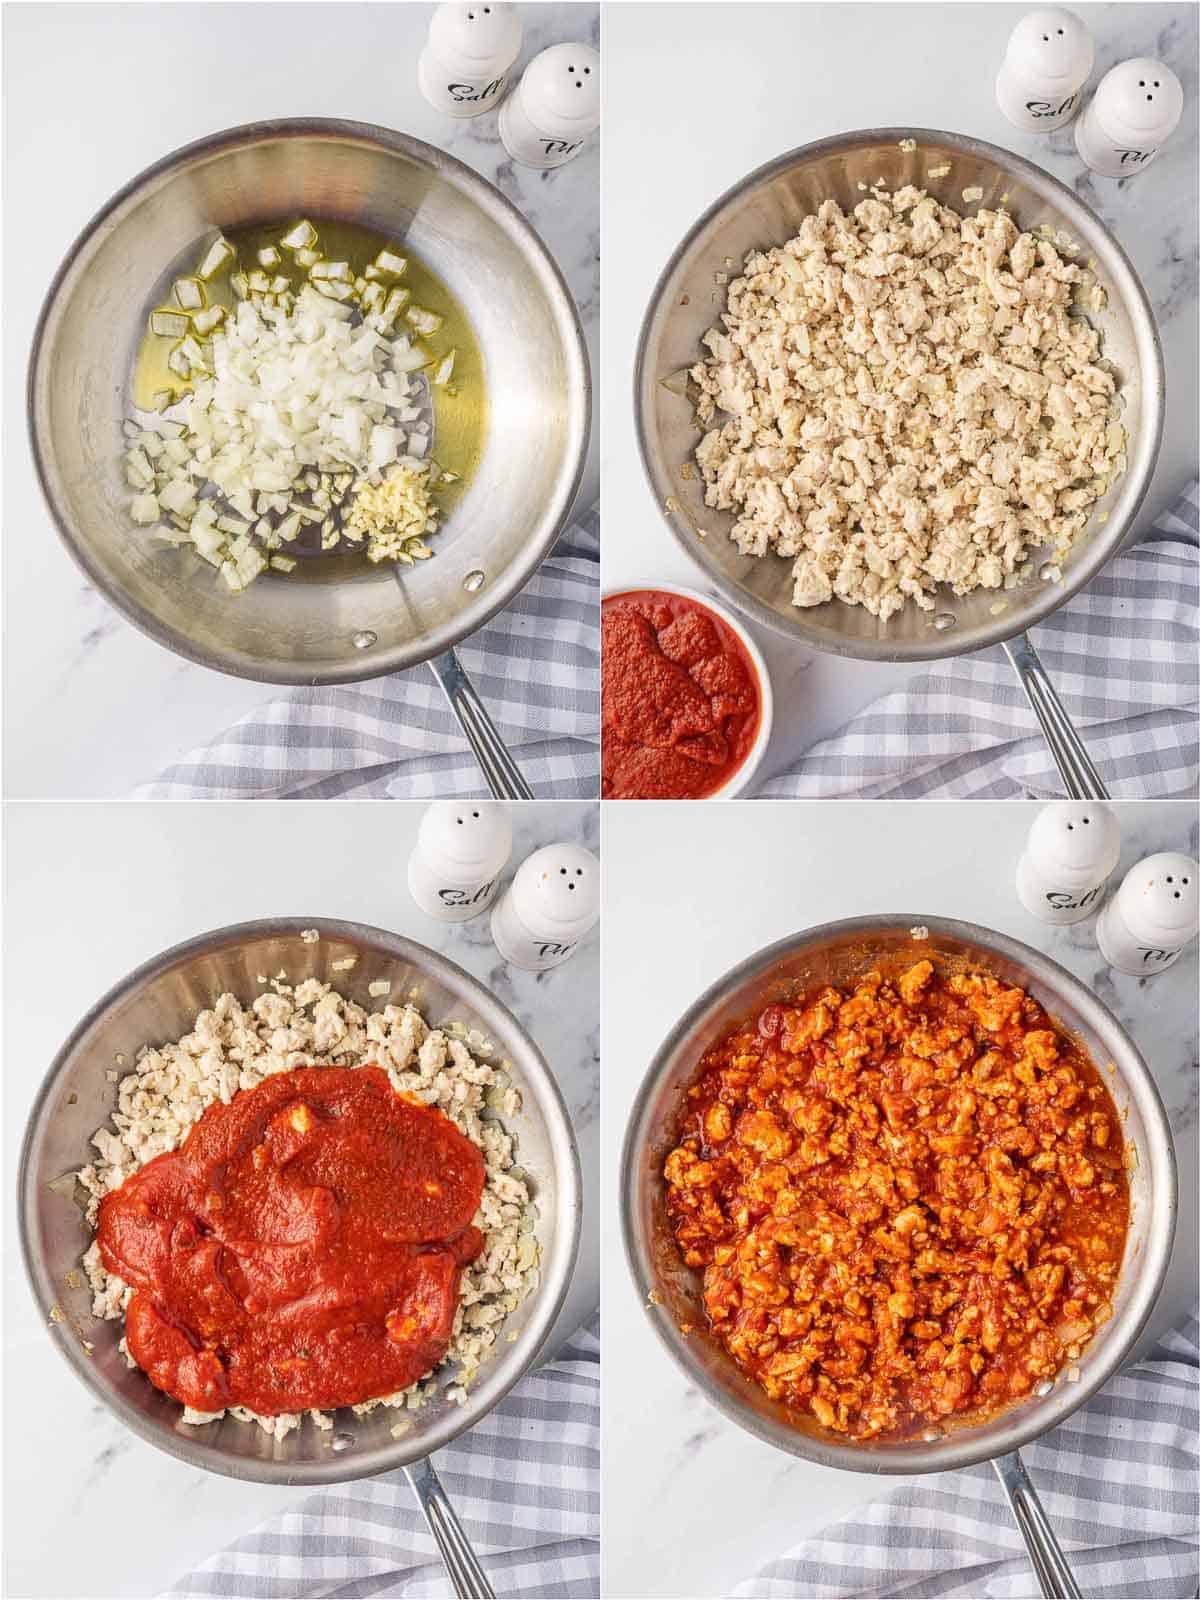 How to prepare meat sauce.